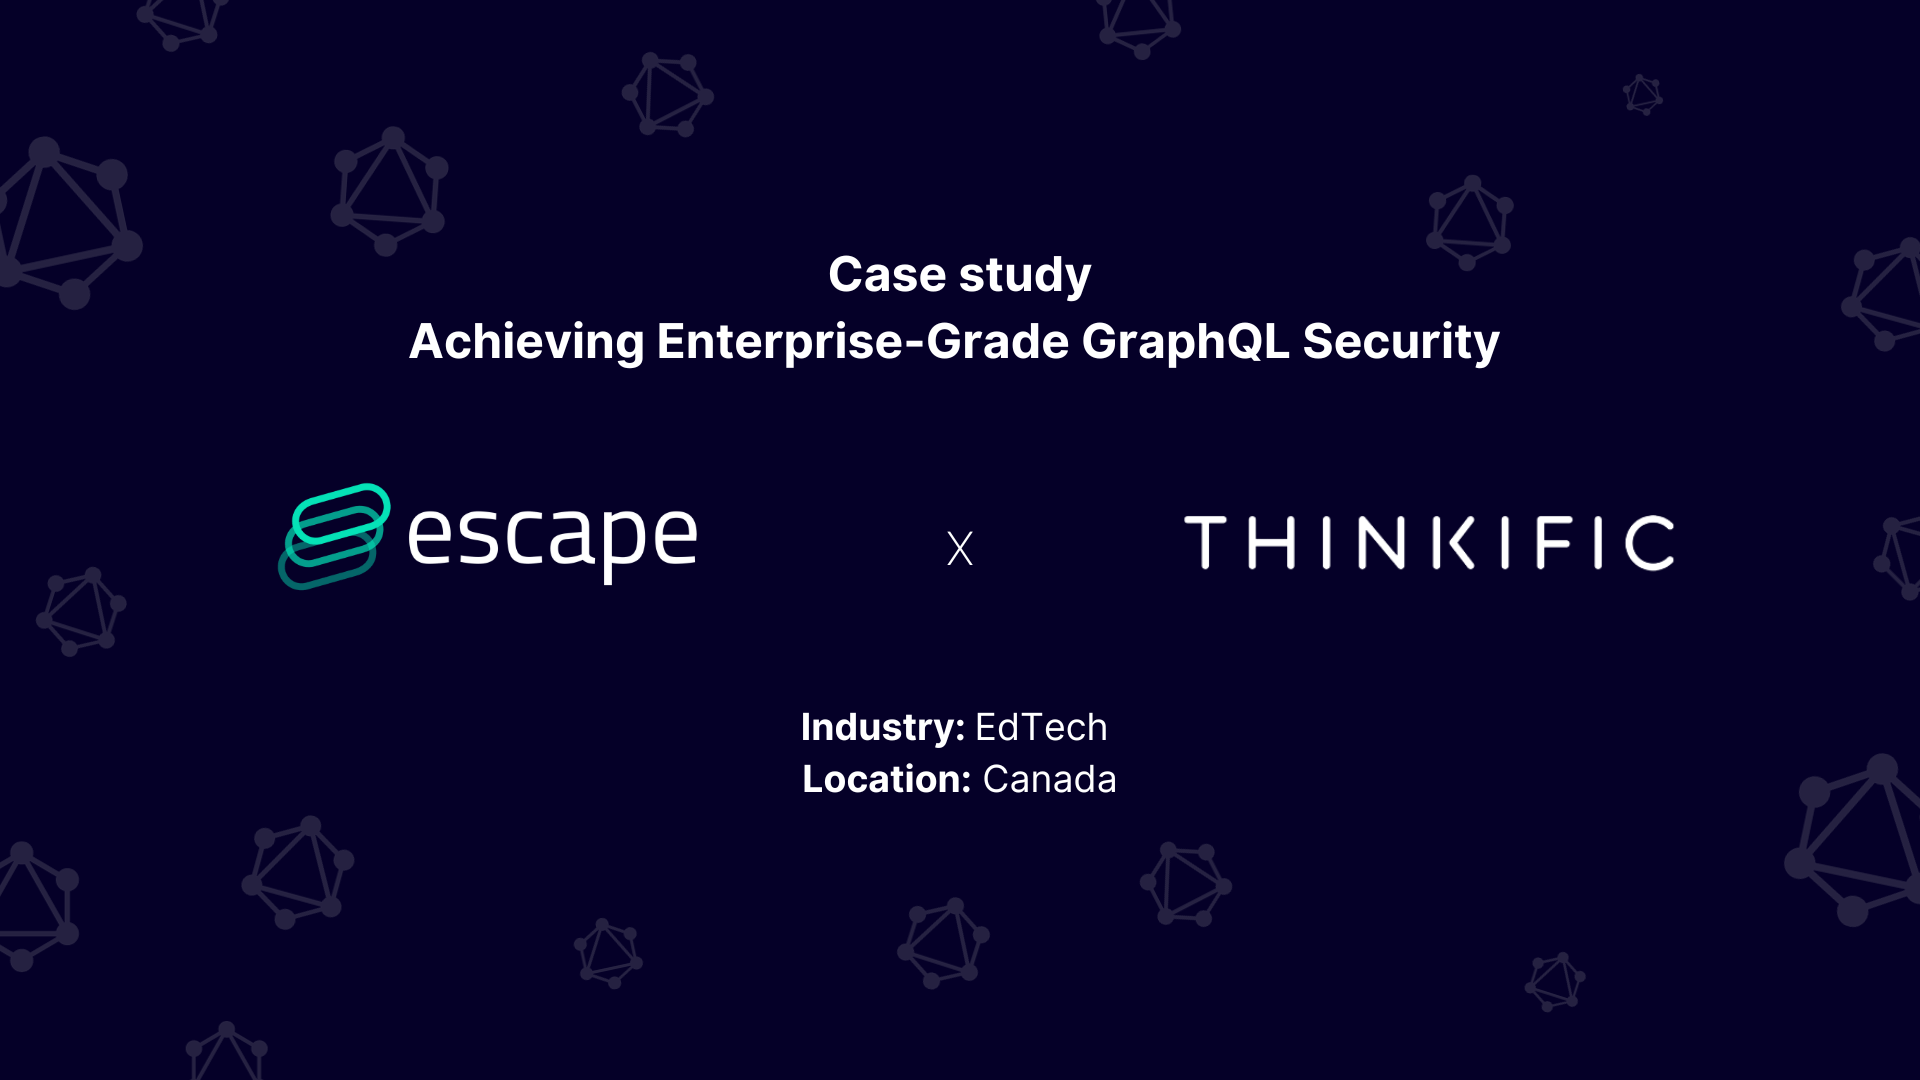 Case Study: How Thinkific has achieved enterprise-grade GraphQL security with Escape